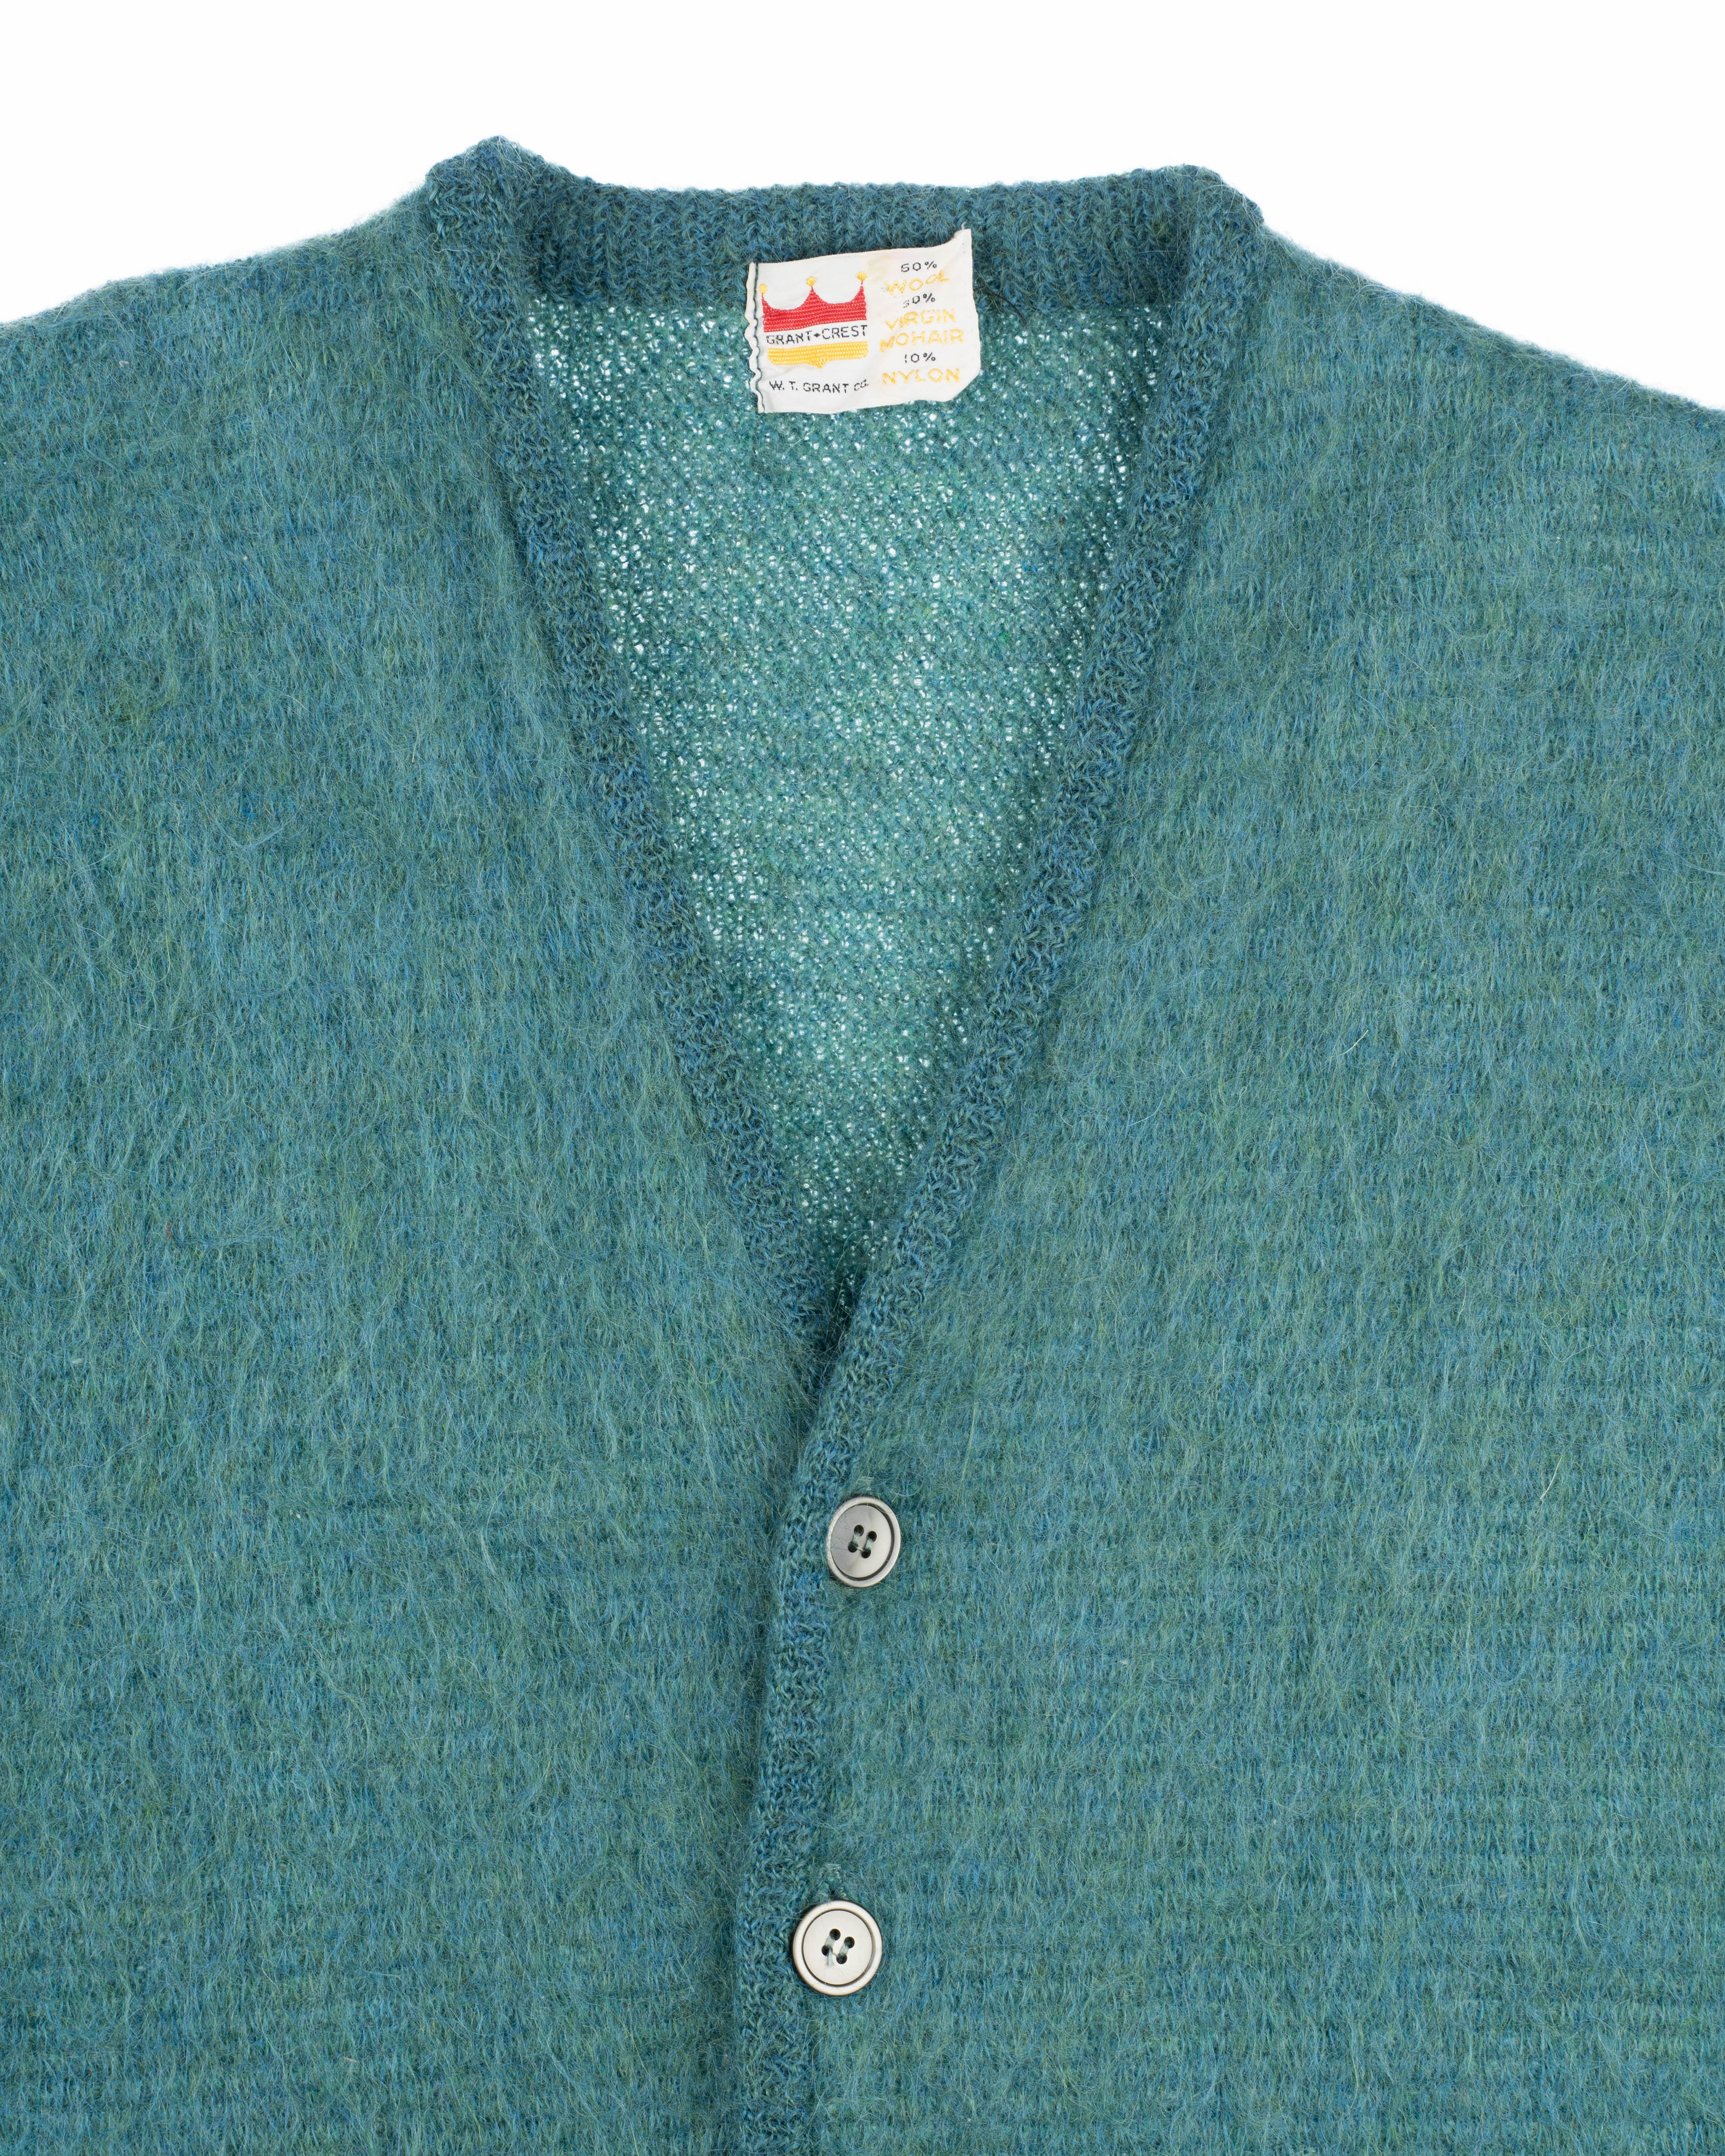 60’s Mohair Cardigan - Small